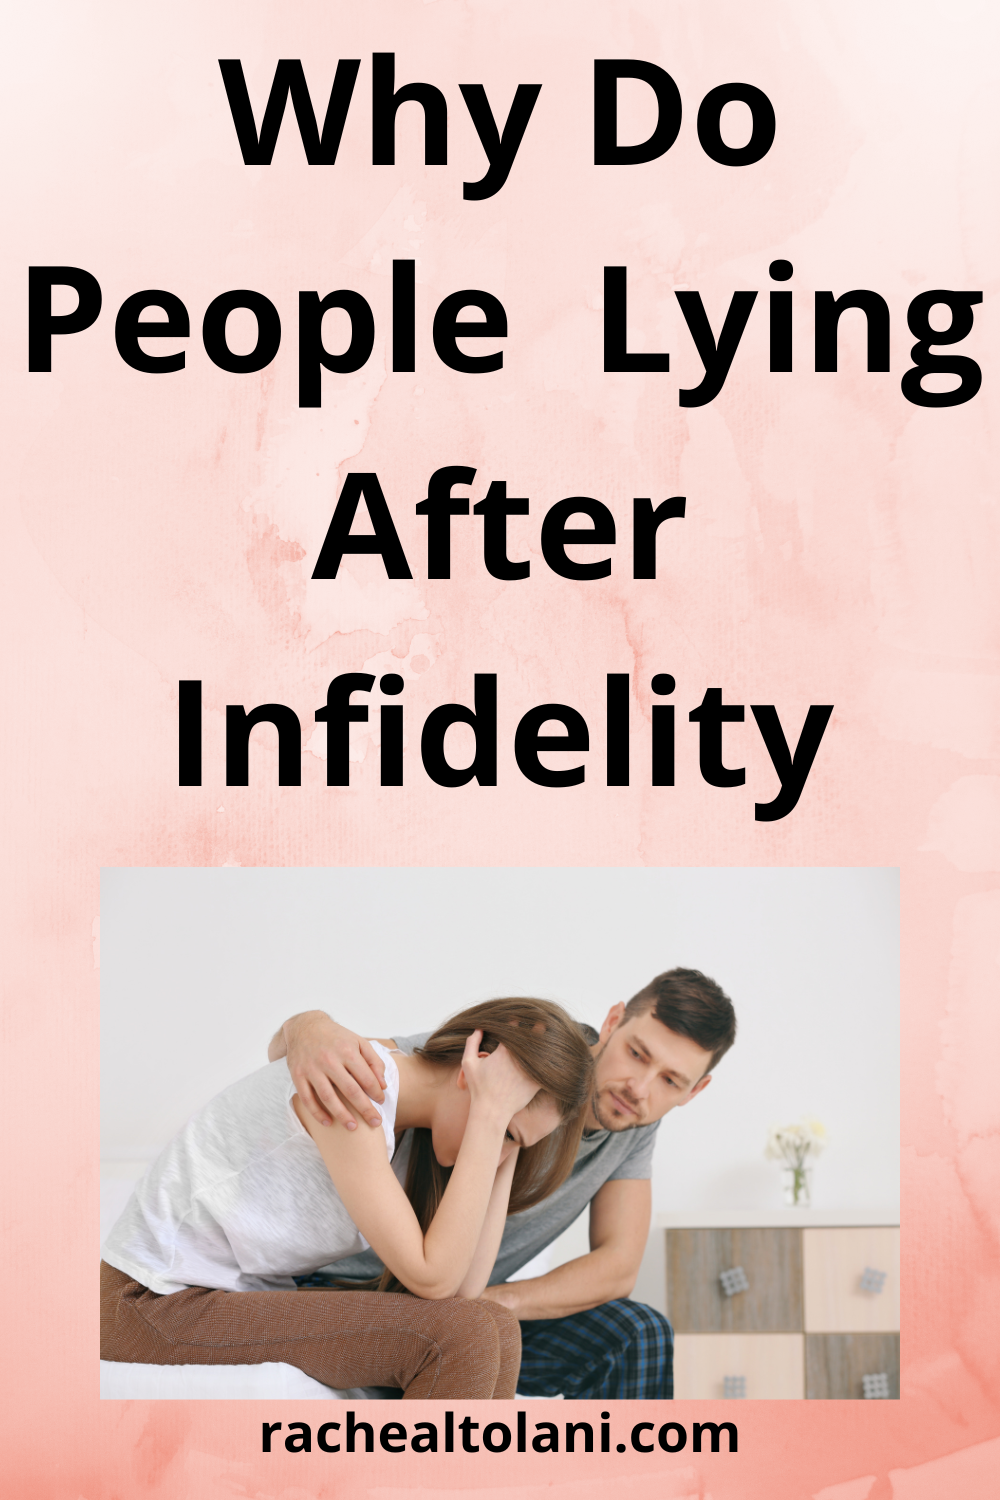 Psychology Behind Infidelity And Lying